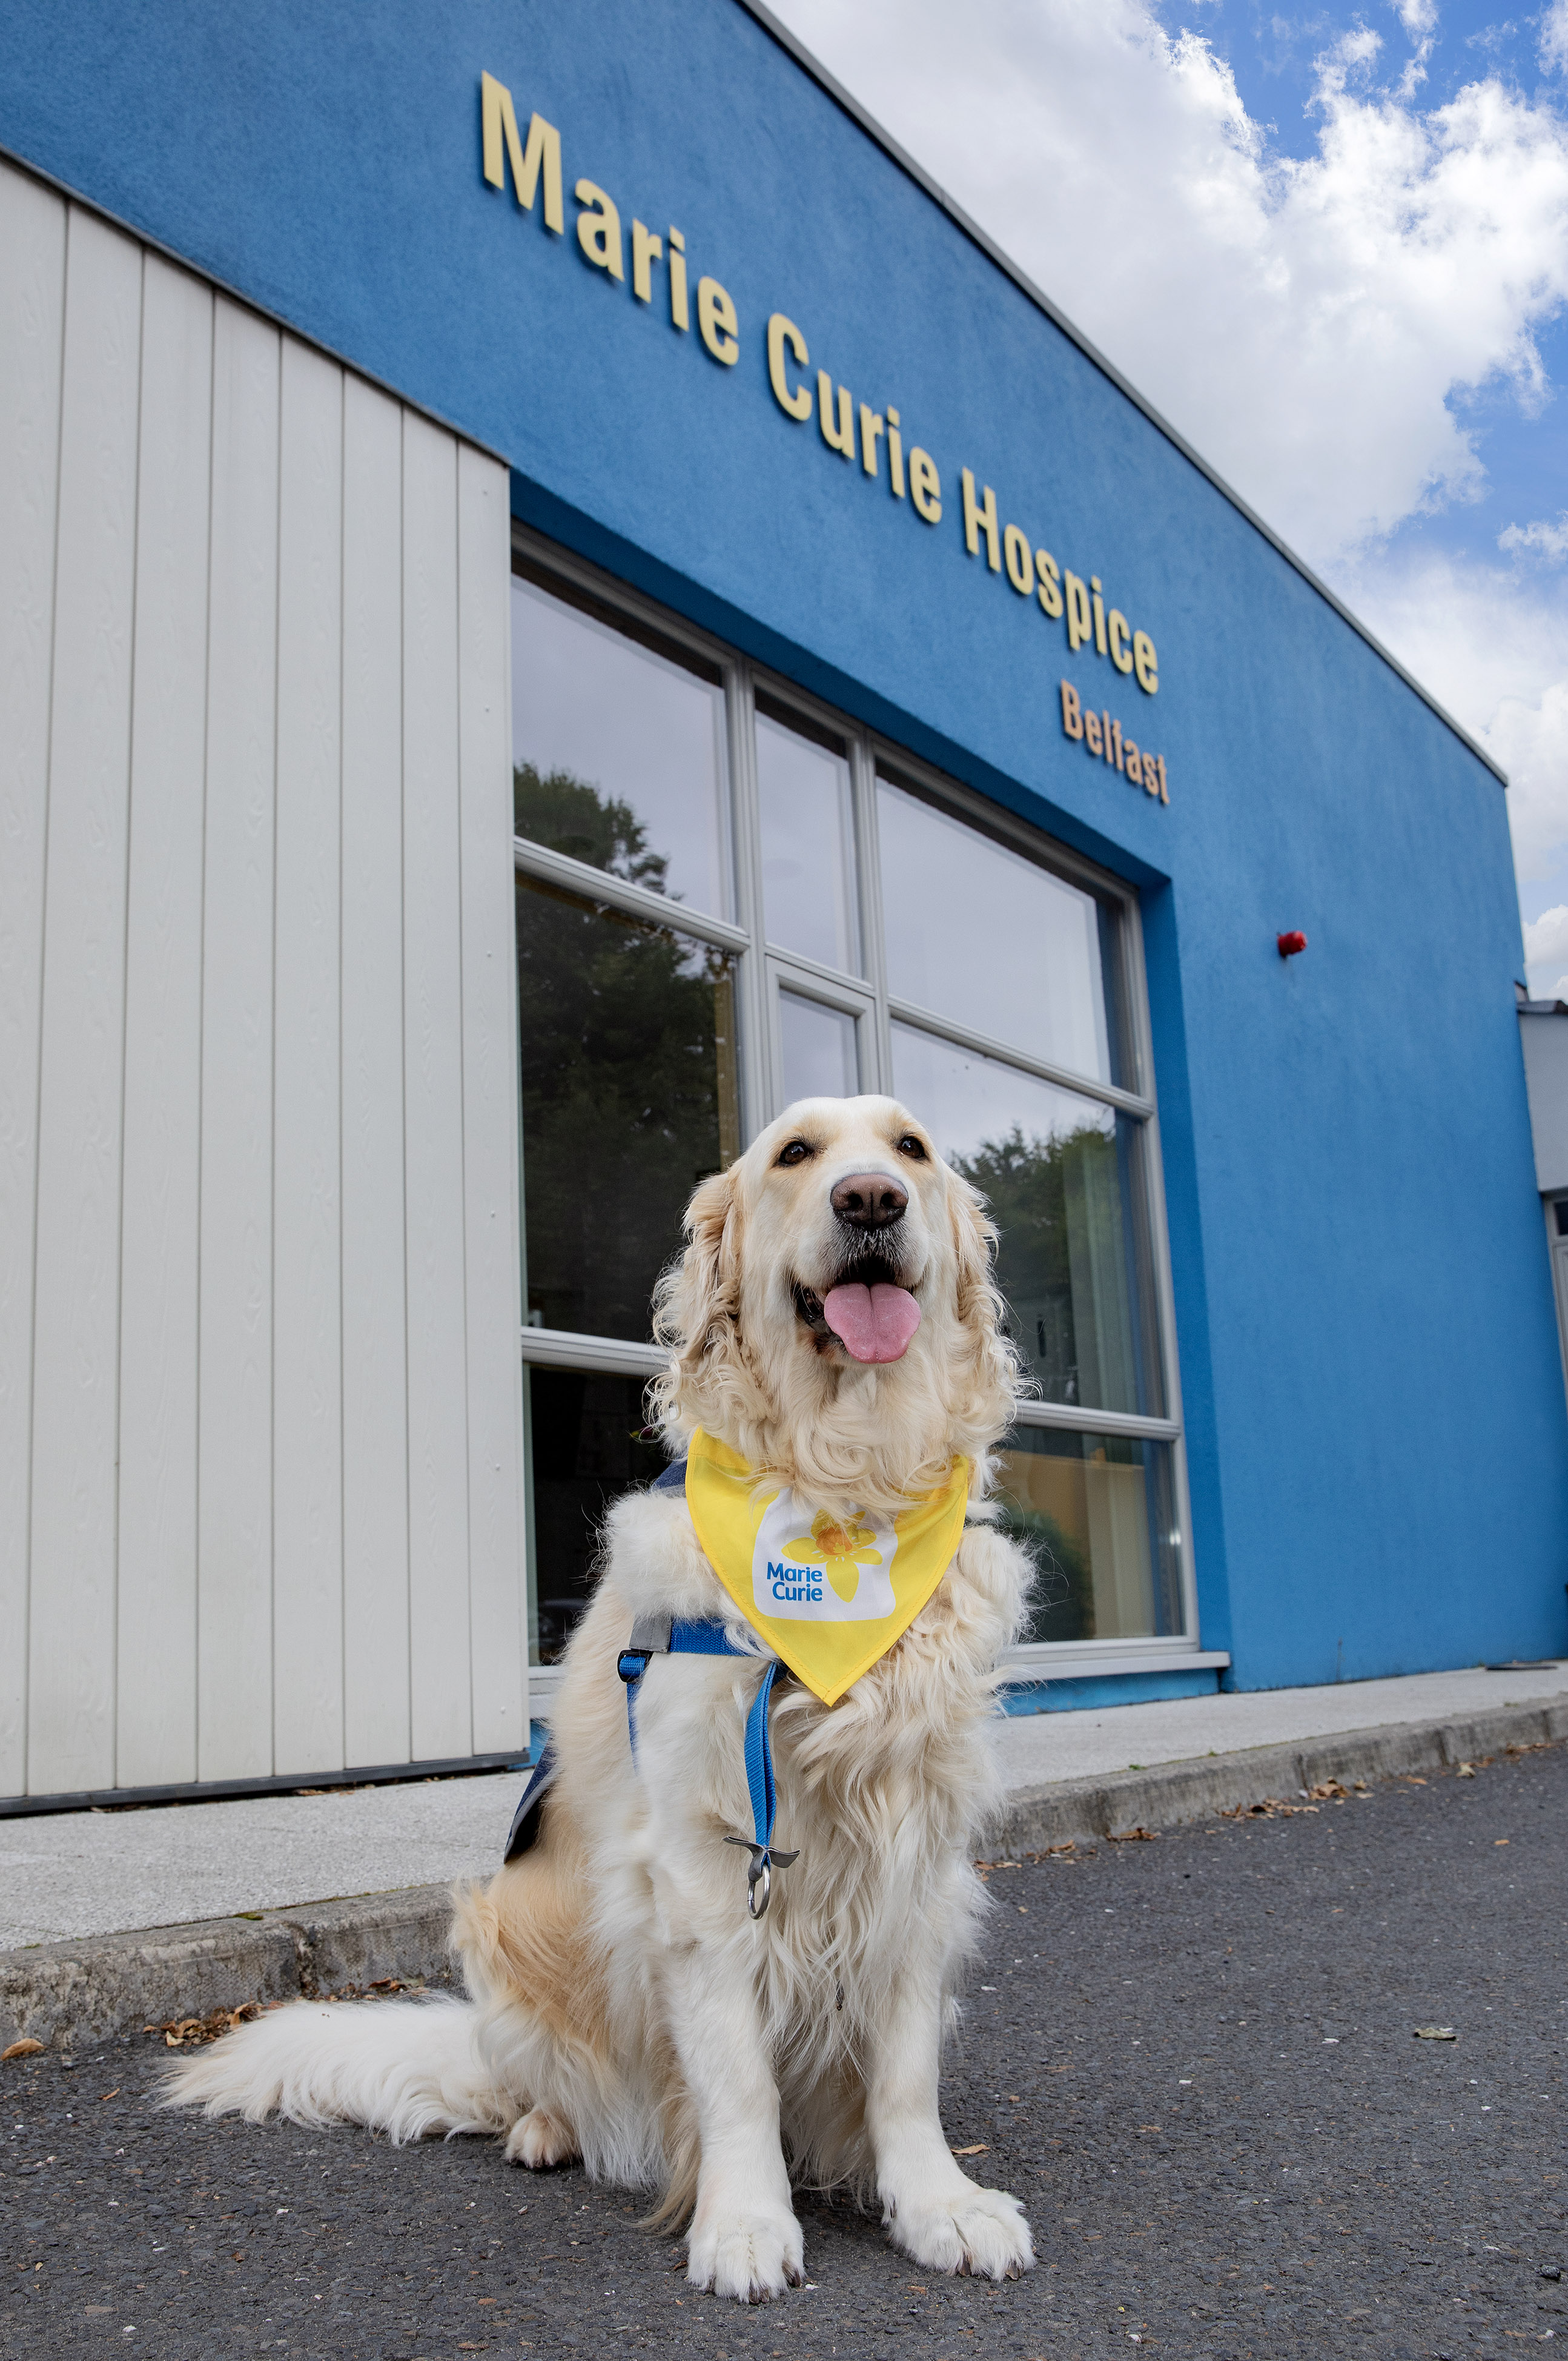 Sandi brings comfort to patients and staff at Marie Curie’s Belfast hospice. (Phil Smyth/Marie Curie handout)